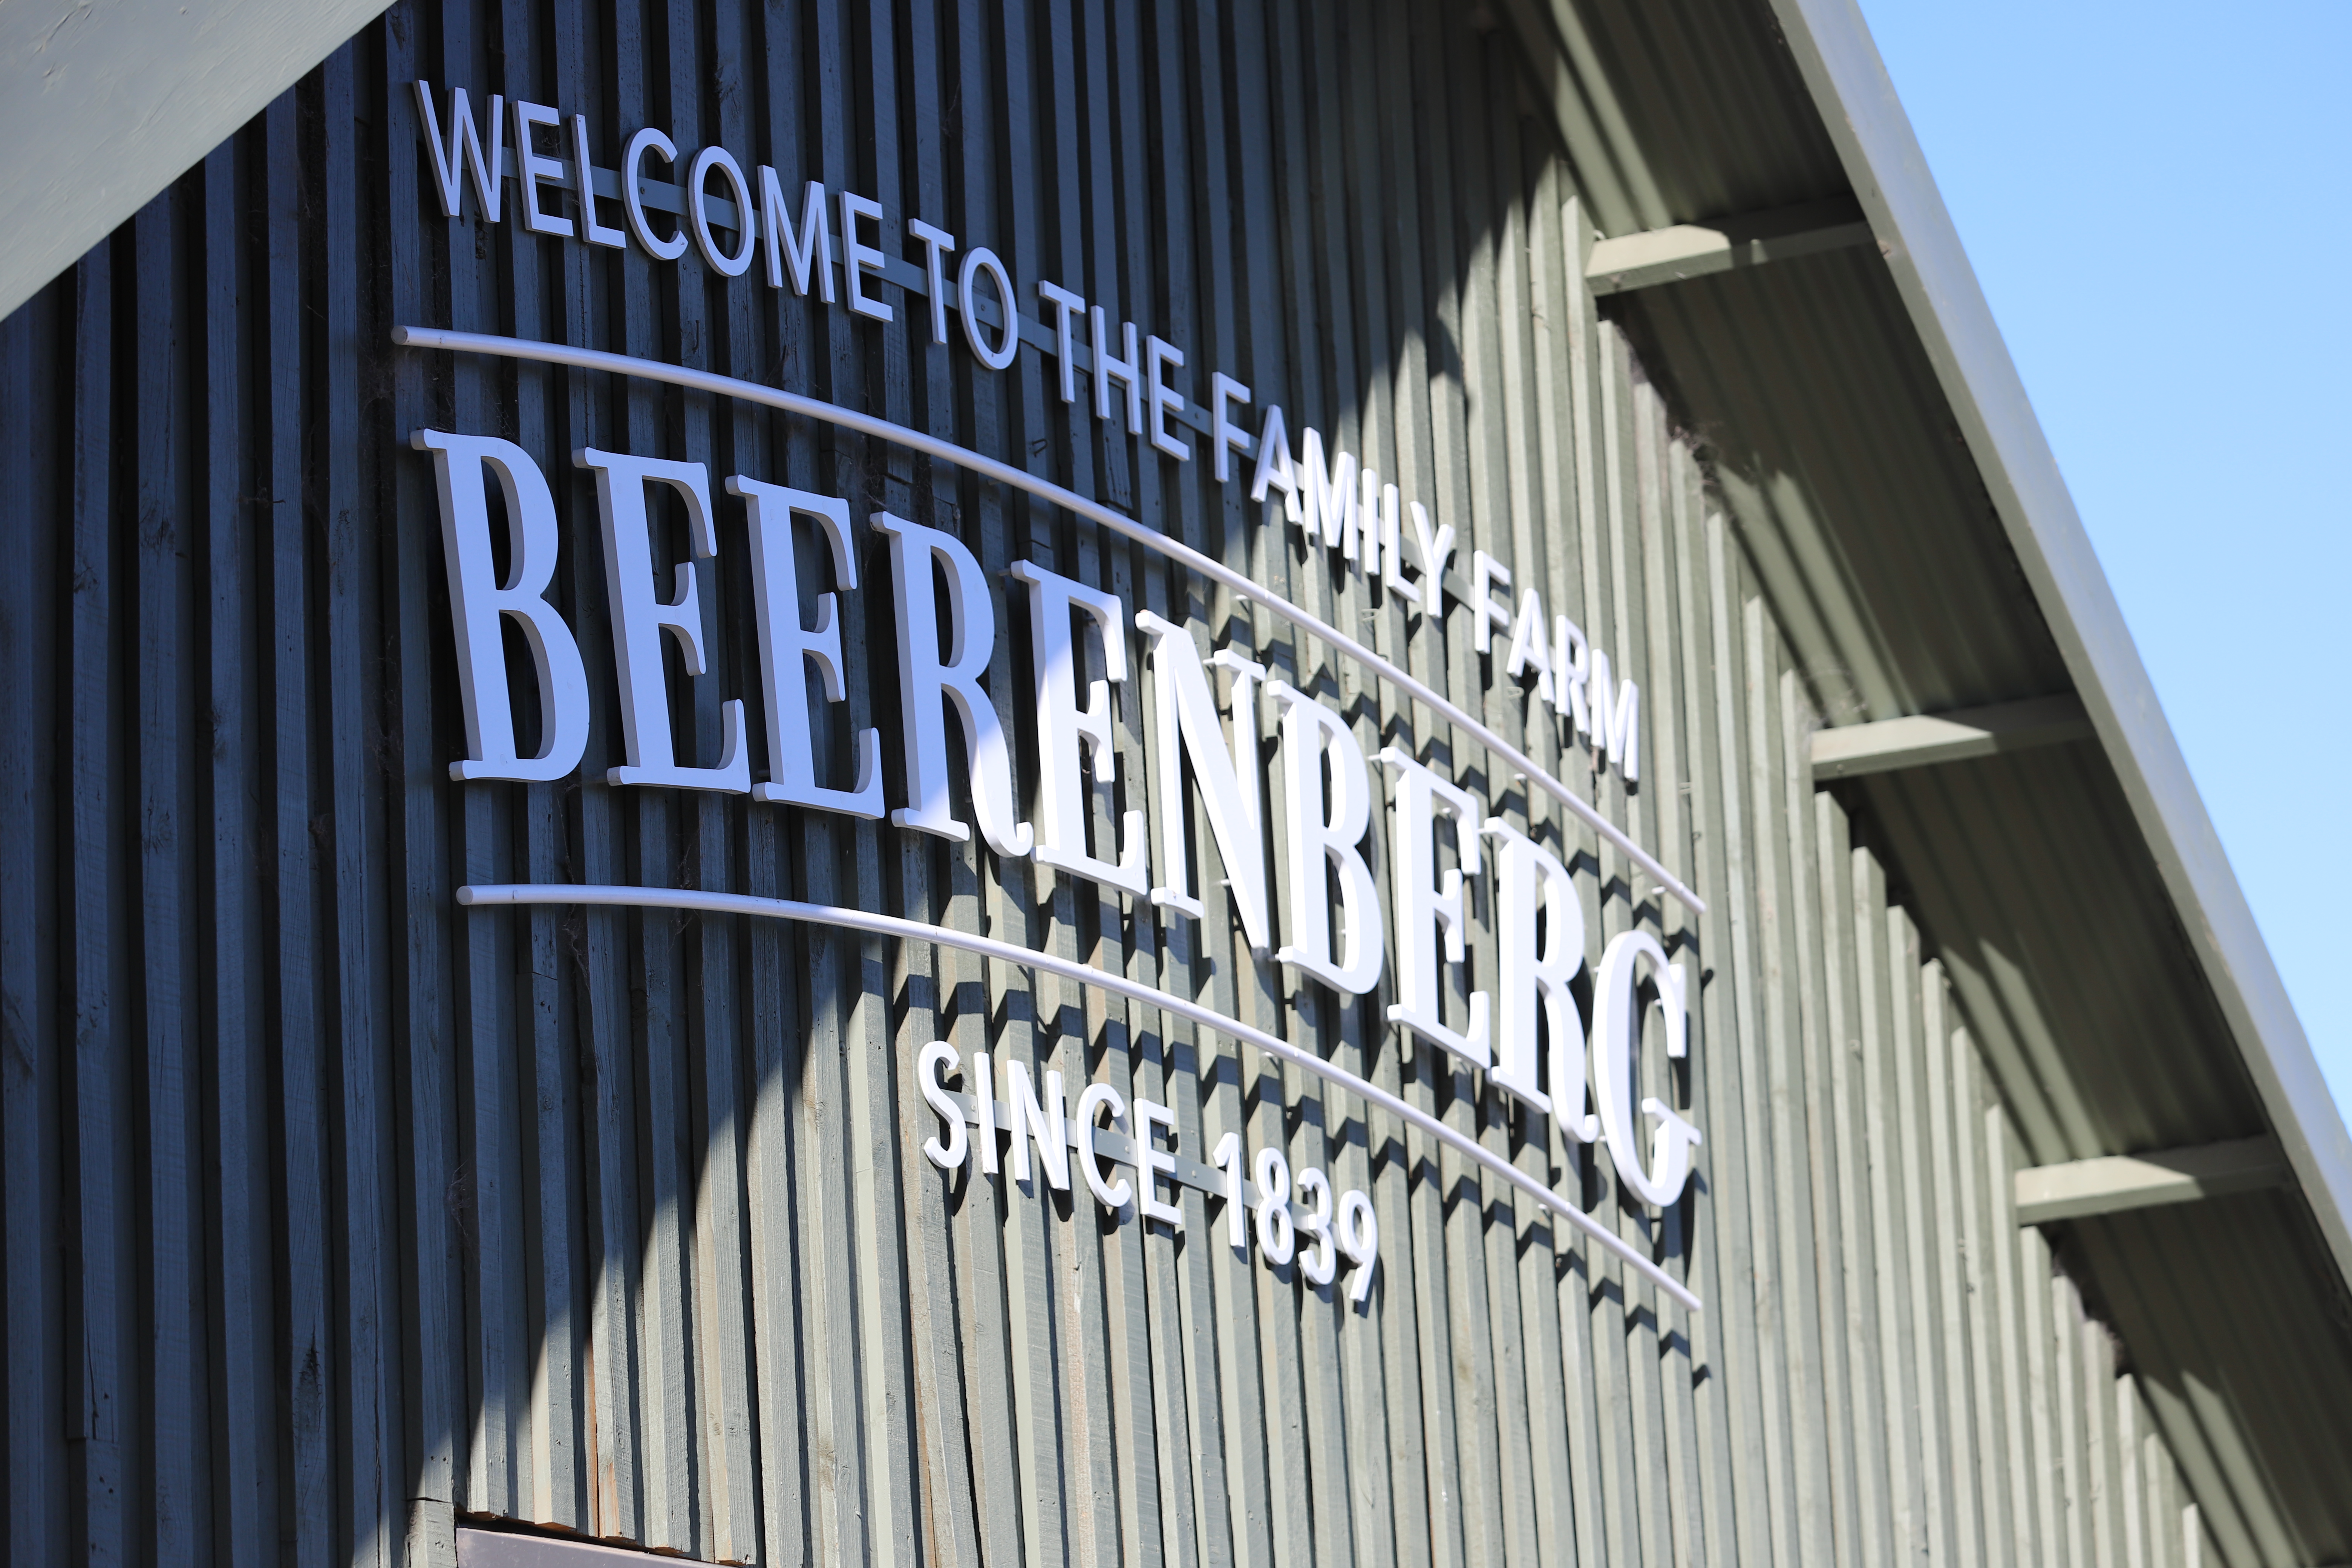 The Beerenberg Family Farm - A must see in the Adelaide hills!